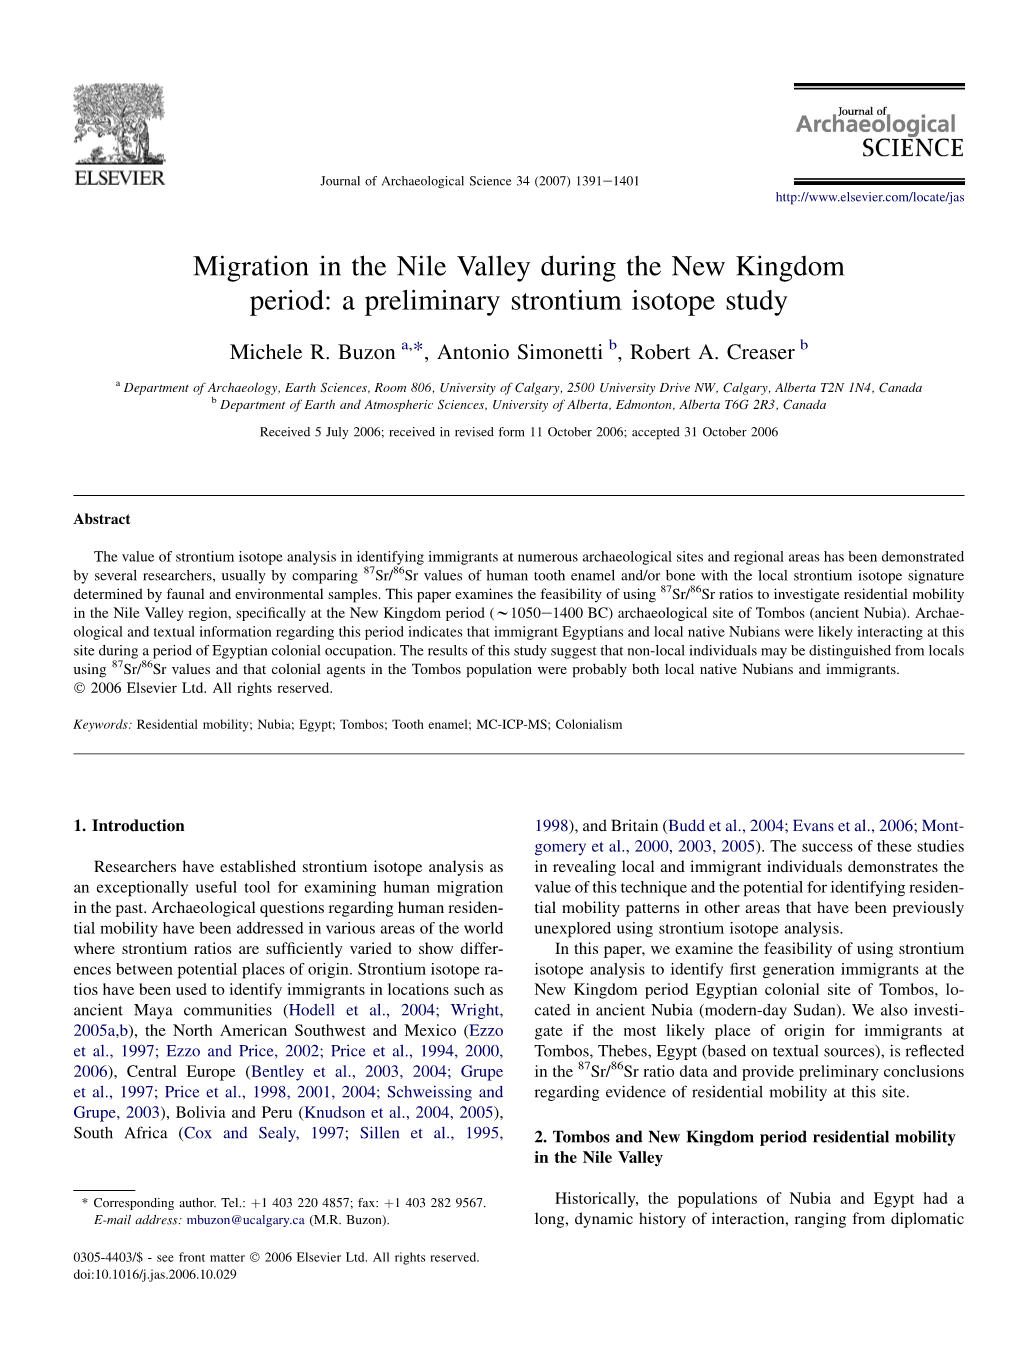 Migration in the Nile Valley During the New Kingdom Period: a Preliminary Strontium Isotope Study